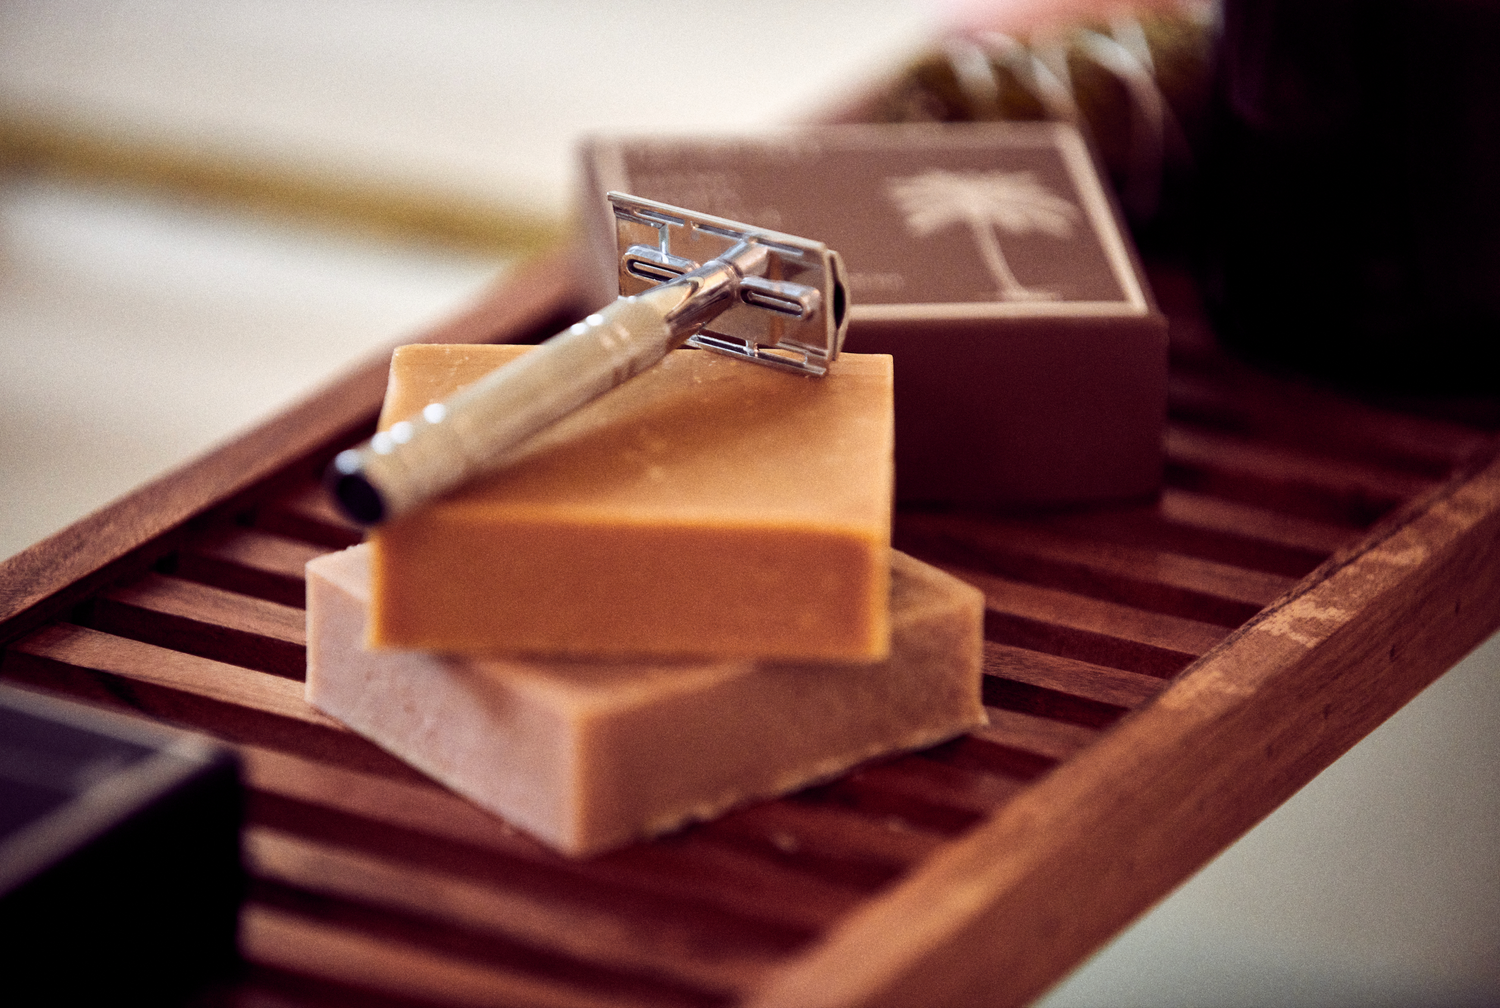 This image shows a metal safety razor on top of two solid shave soap bars. These are a part of Desesh's range of zero waste, plastic free, eco friendly, more sustainable personal care and everyday essential products.